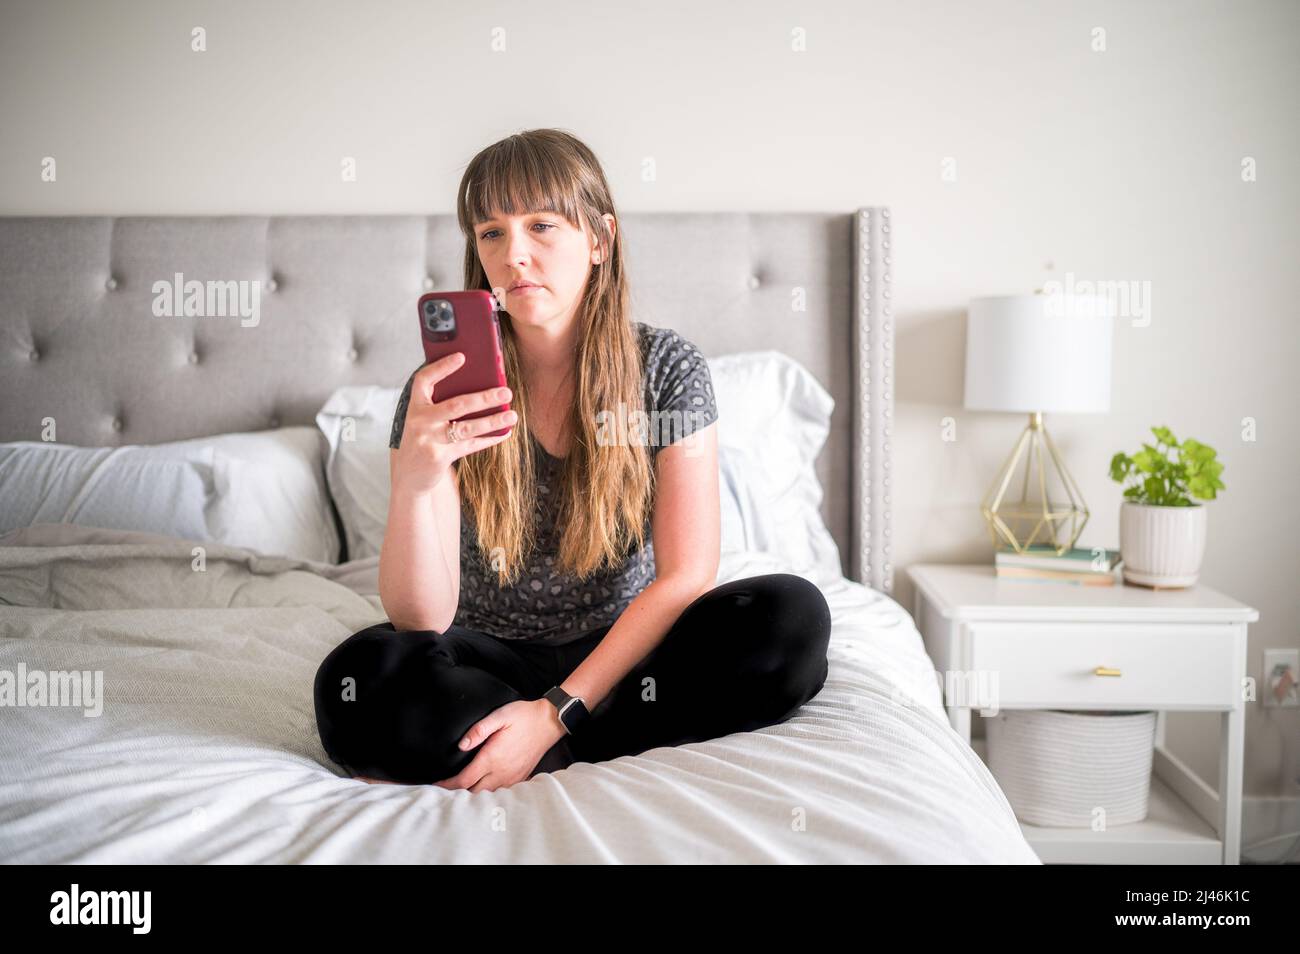 Woman sitting on bed while looking at phone Stock Photo